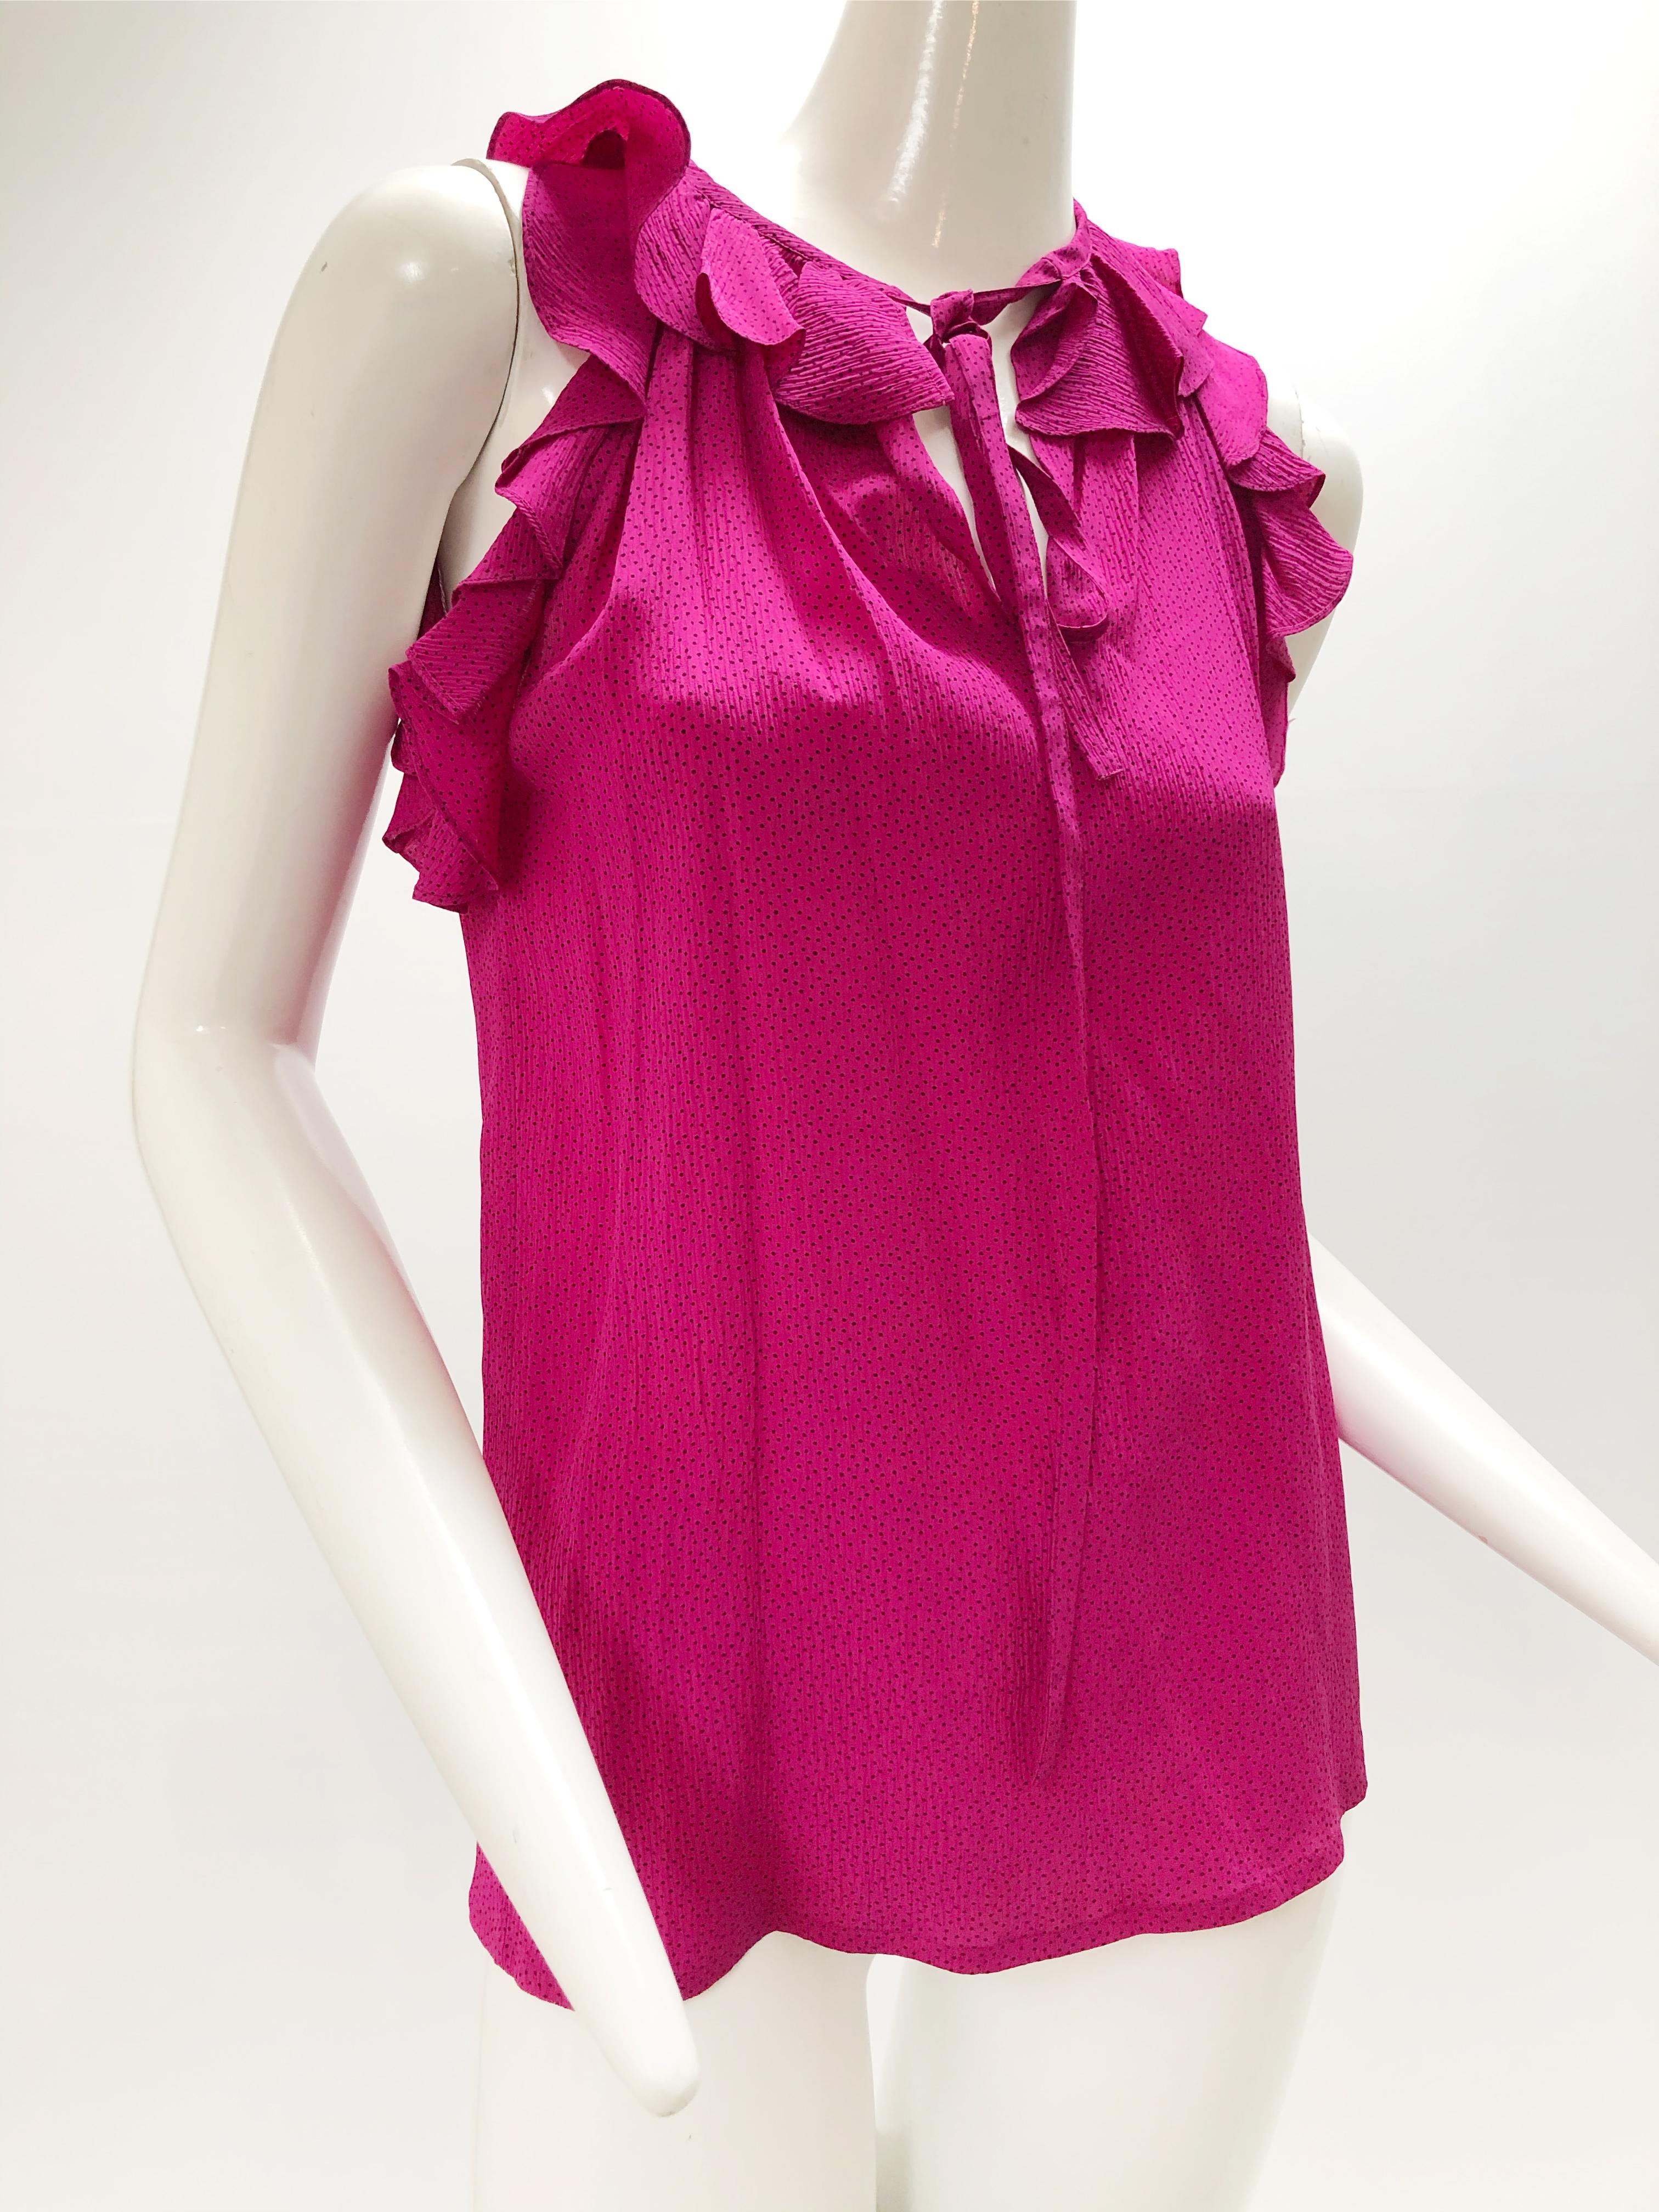 1980s Yves Saint Laurent for ruffled and ribbon tie front camisole in hot pink silk with black pin dots.  Bias ruffles at neck and shoulders. French size 38.